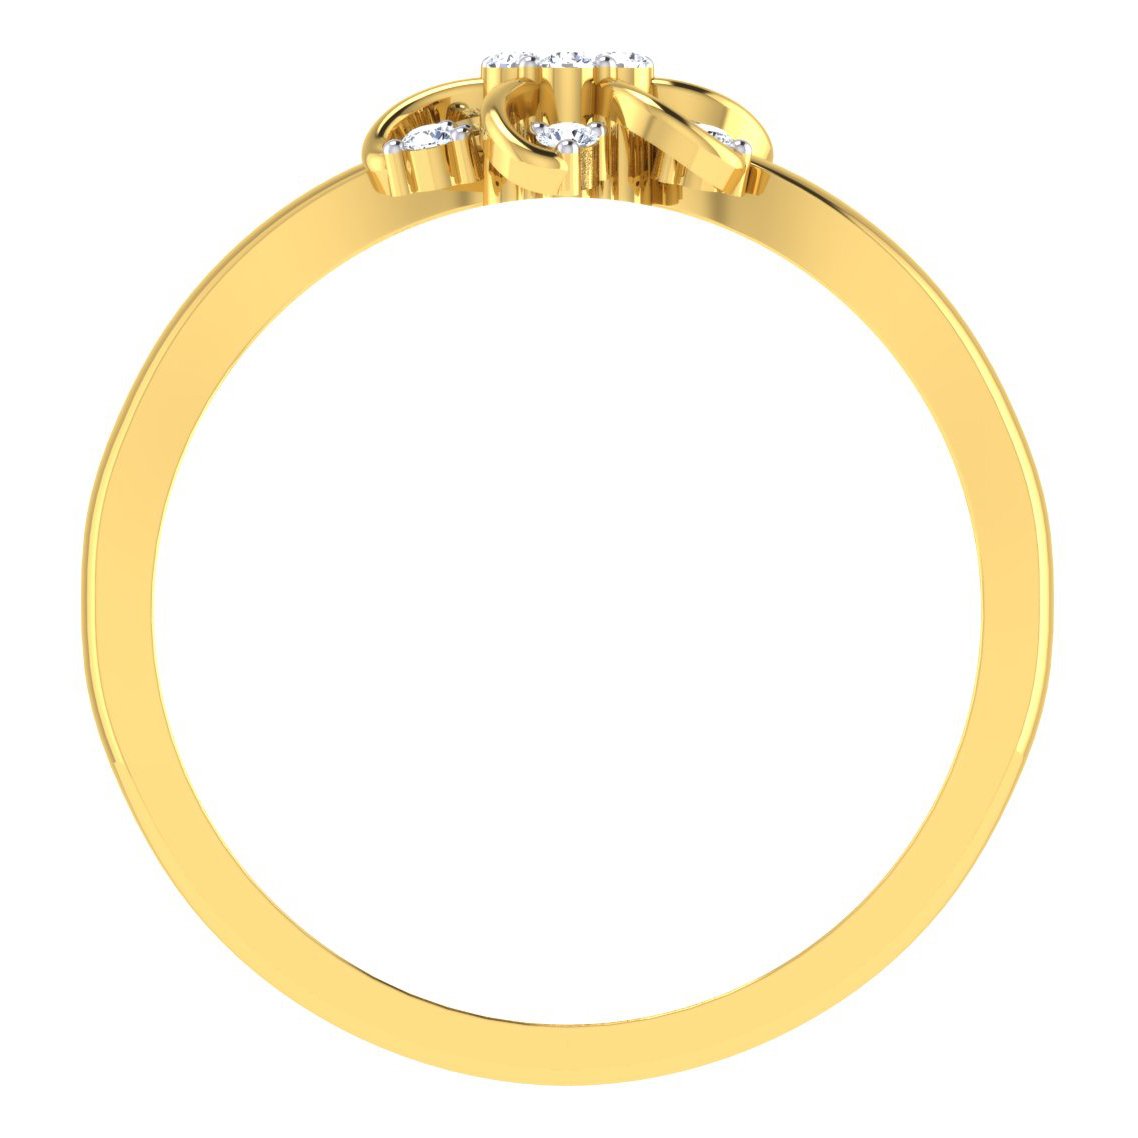 Rhyme Of Love Diamond Ring In Pure Gold By Dhanji Jewels